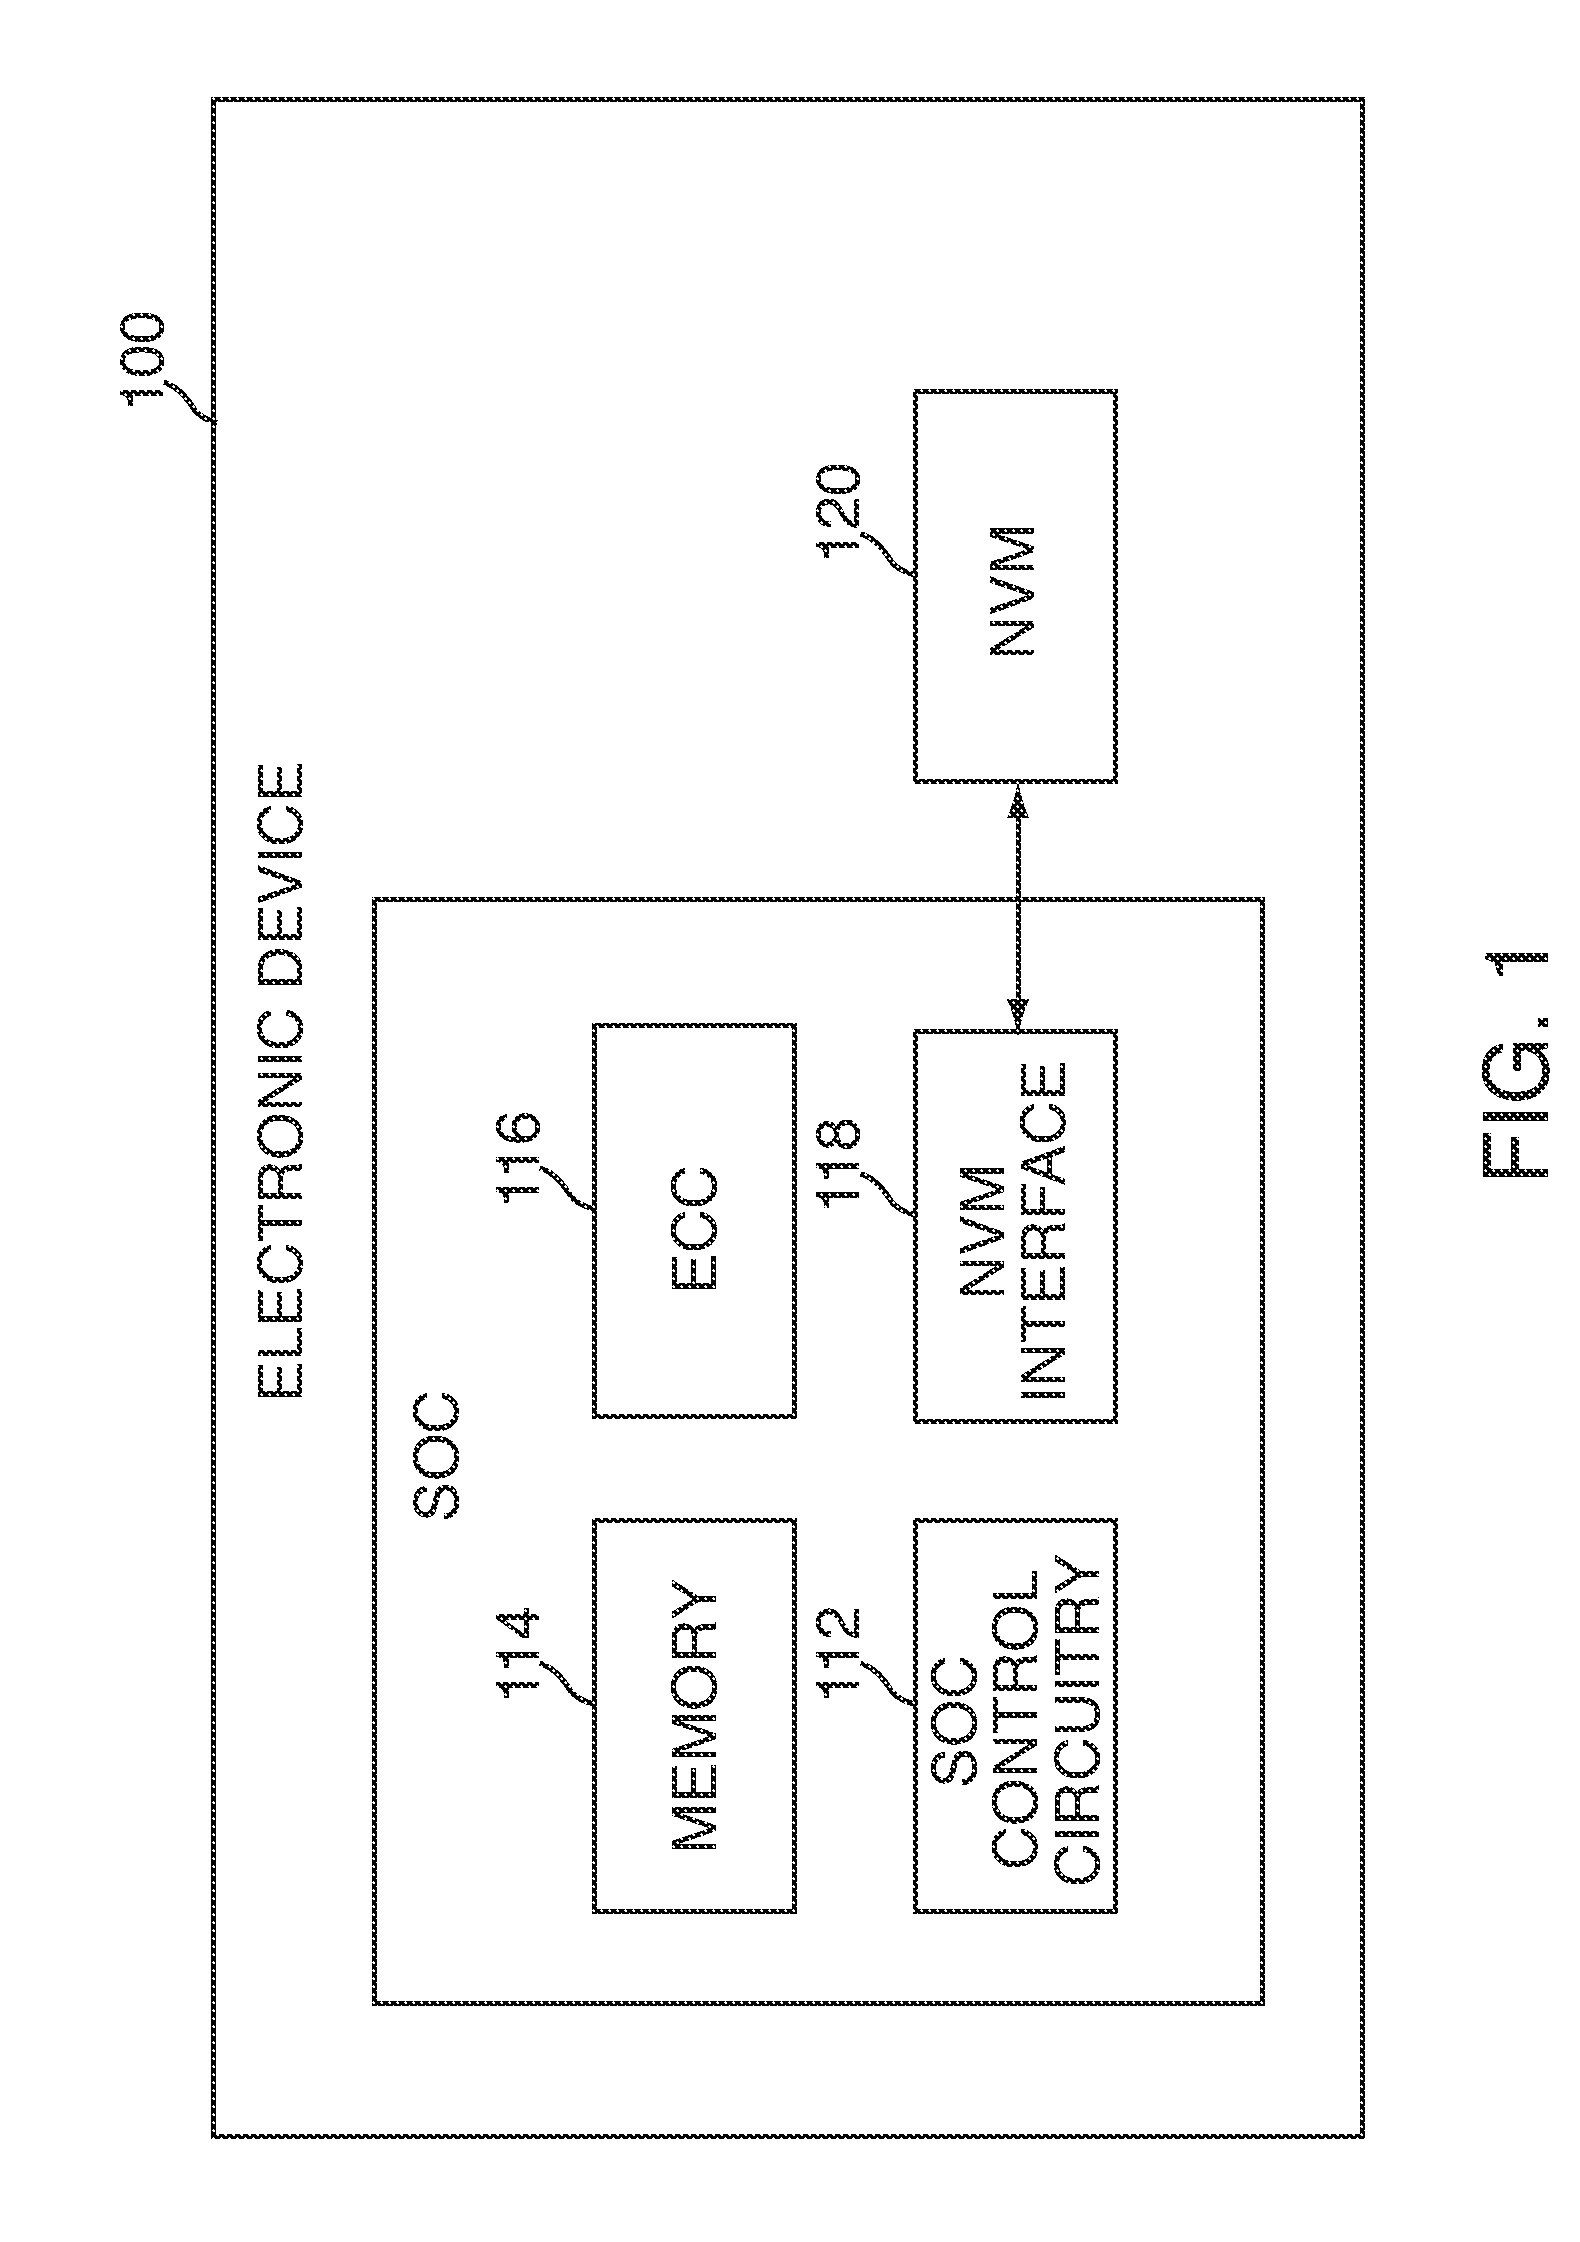 Systems and methods for determining the status of memory locations in a non-volatile memory